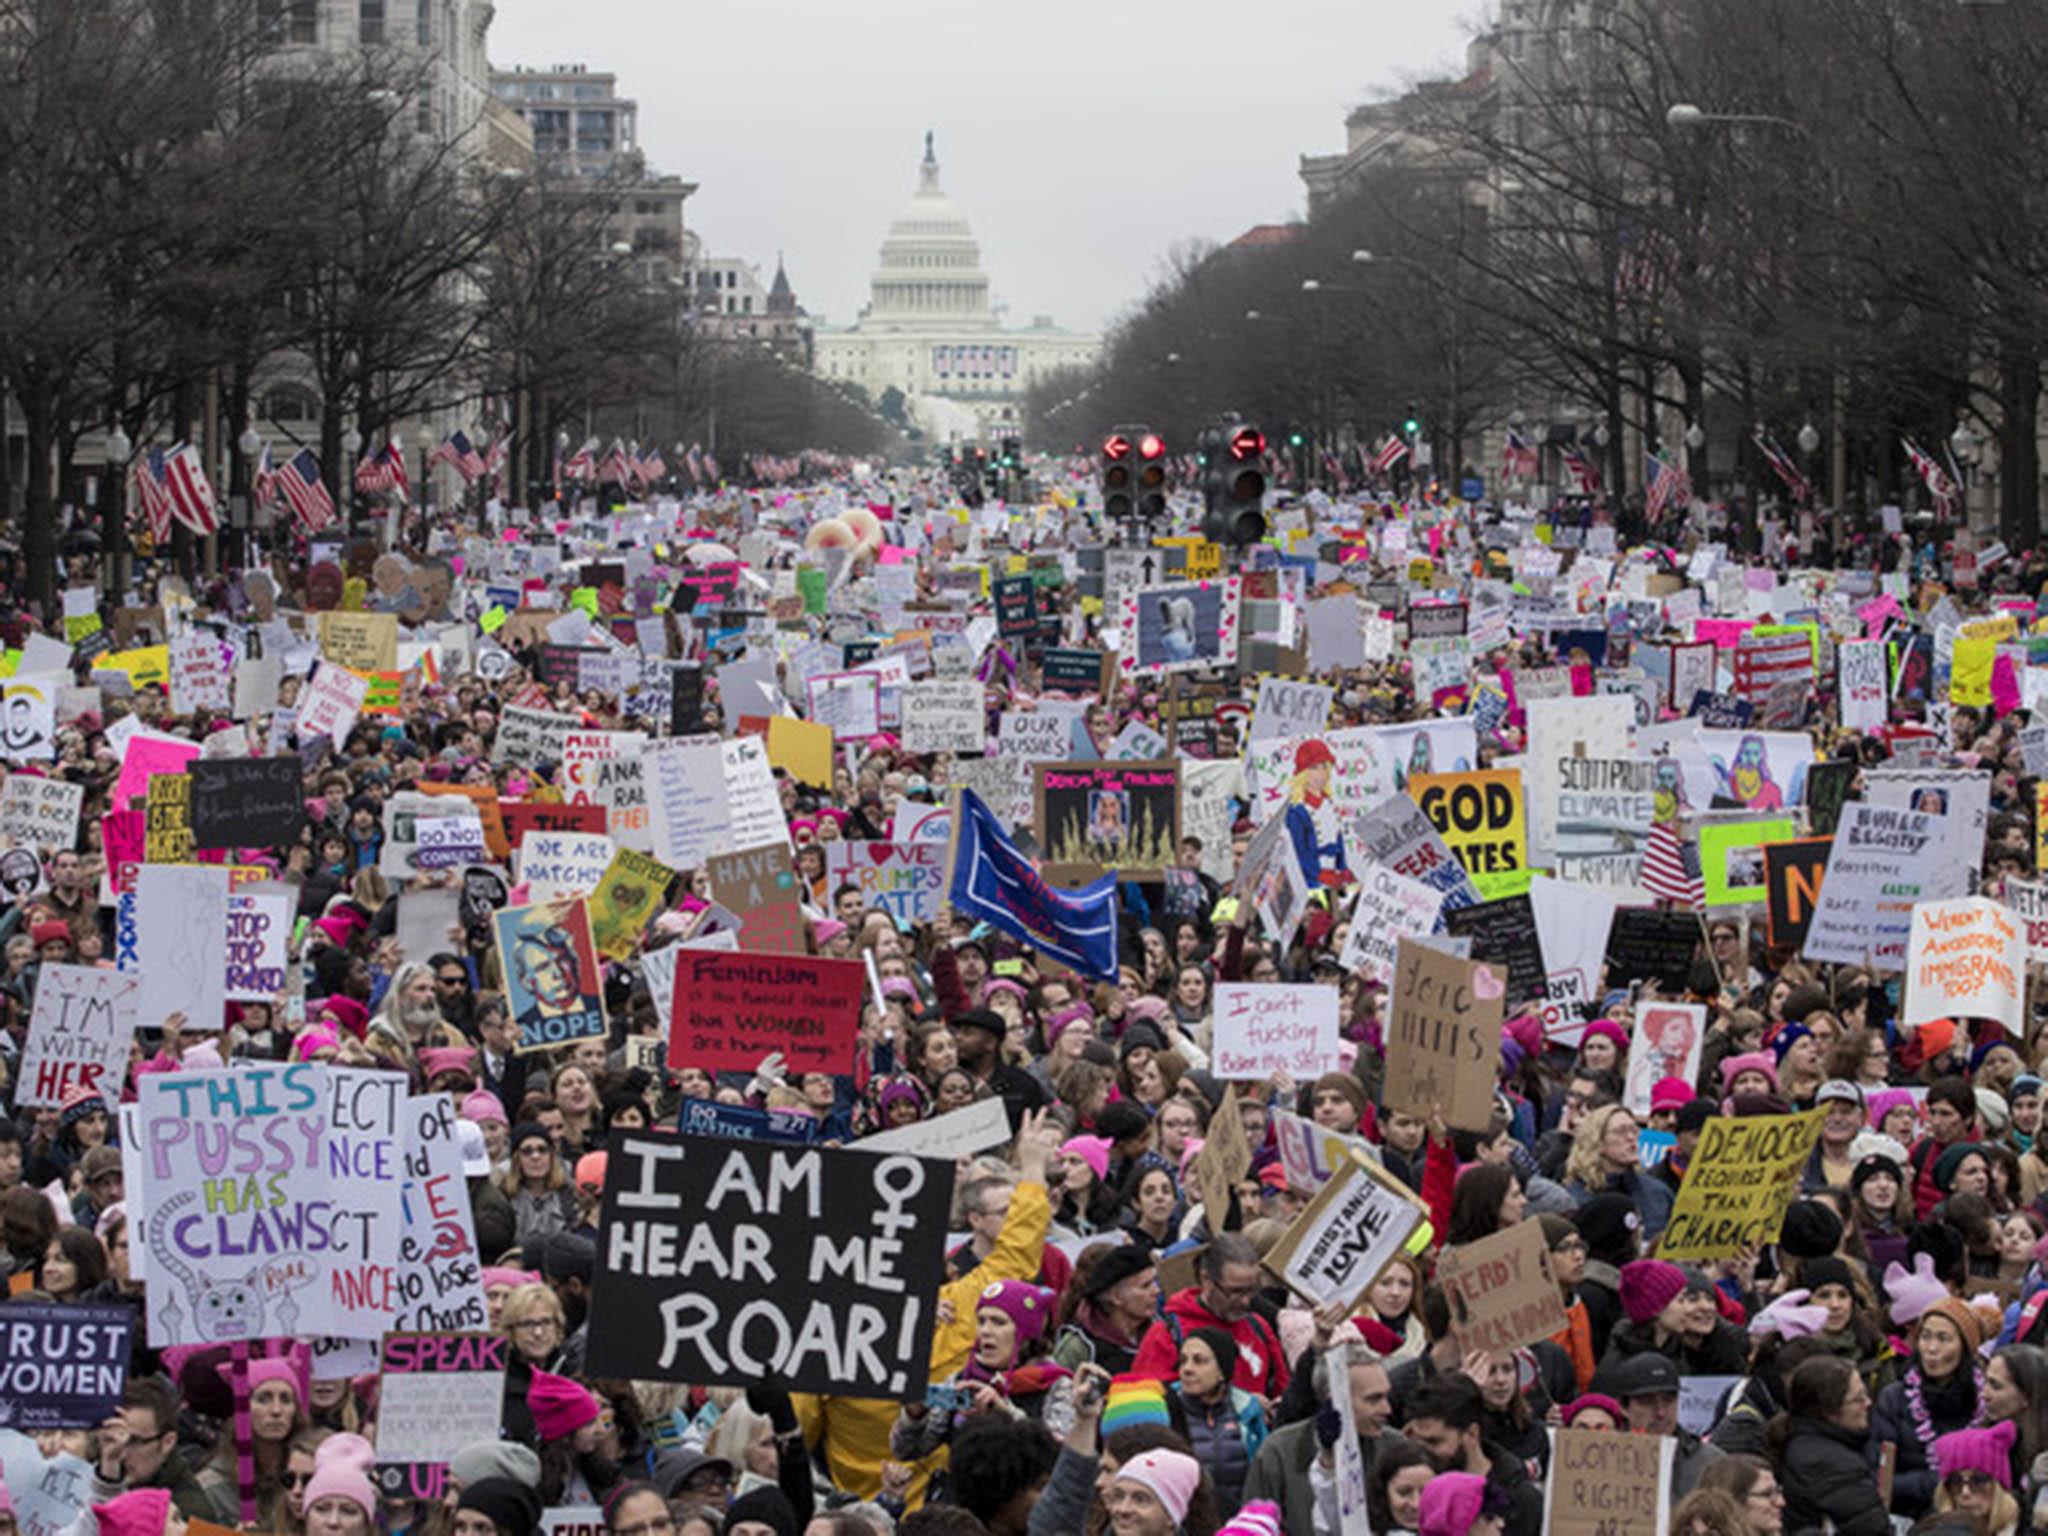 Thousands of women took to the streets on Saturday in Washington to march in protest of Donald Trump's inauguration